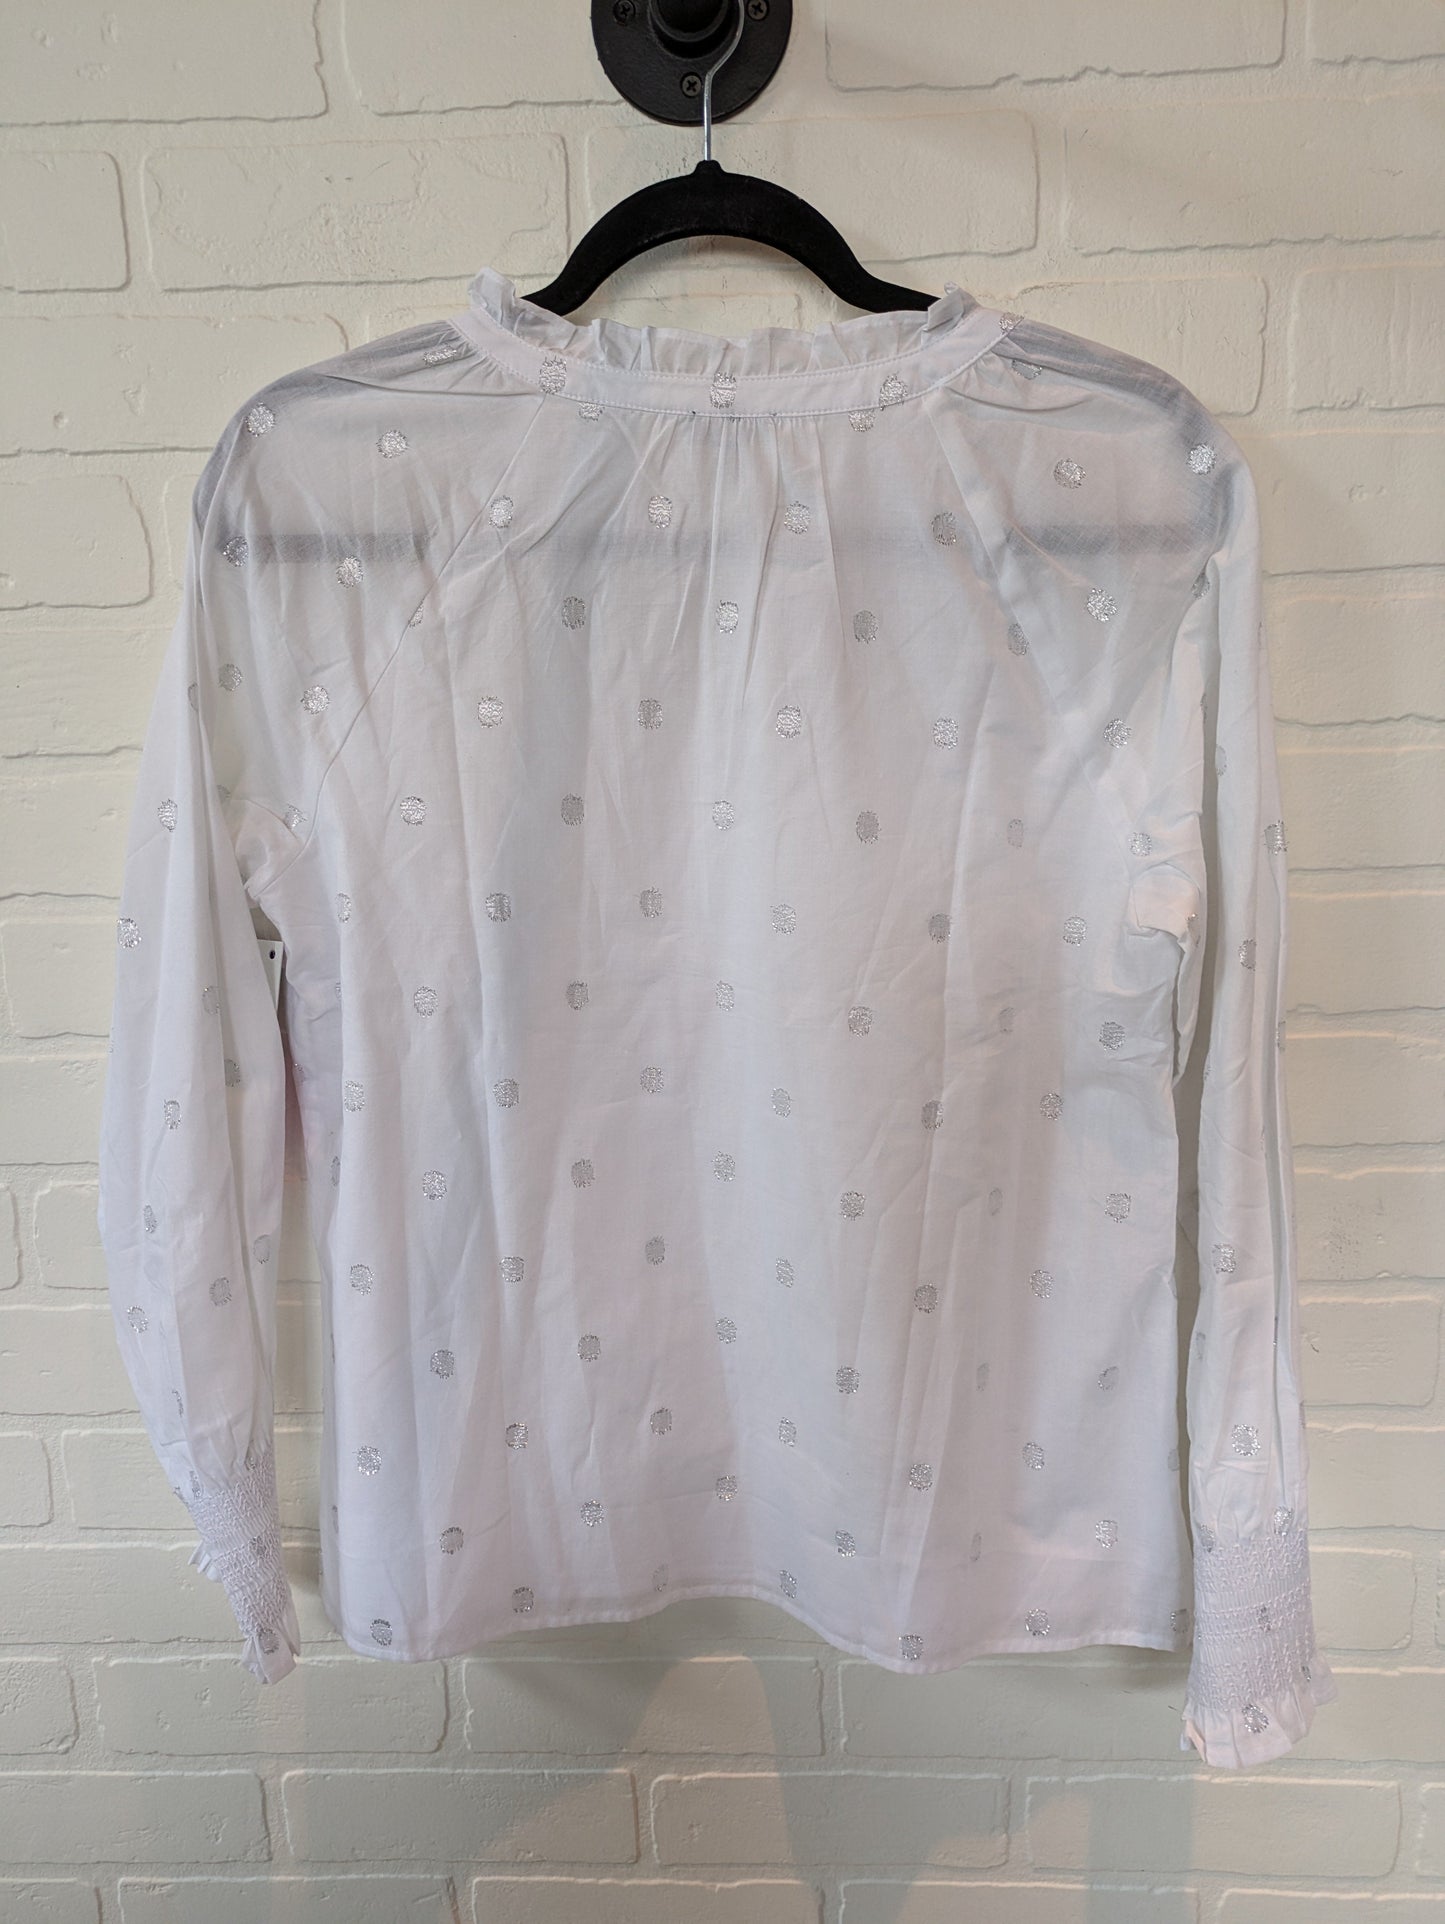 White Top Long Sleeve Talbots, Size M